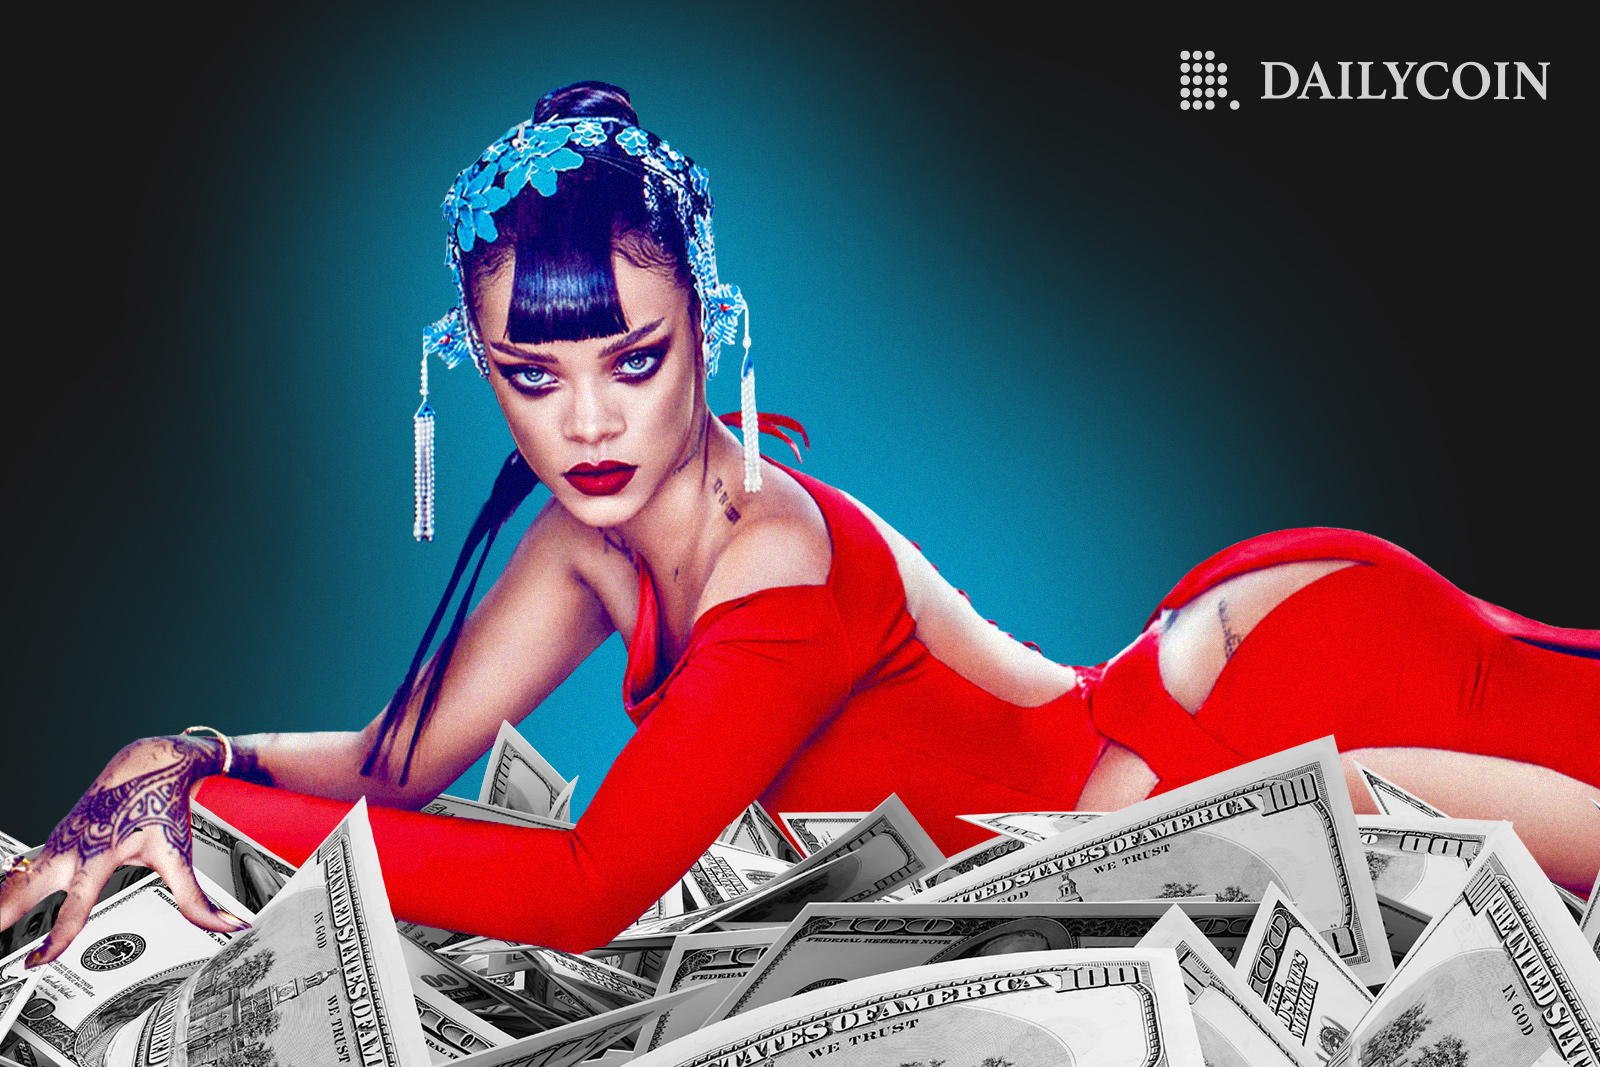 Singer Rihanna in a red dress laying on top of dollar bills.